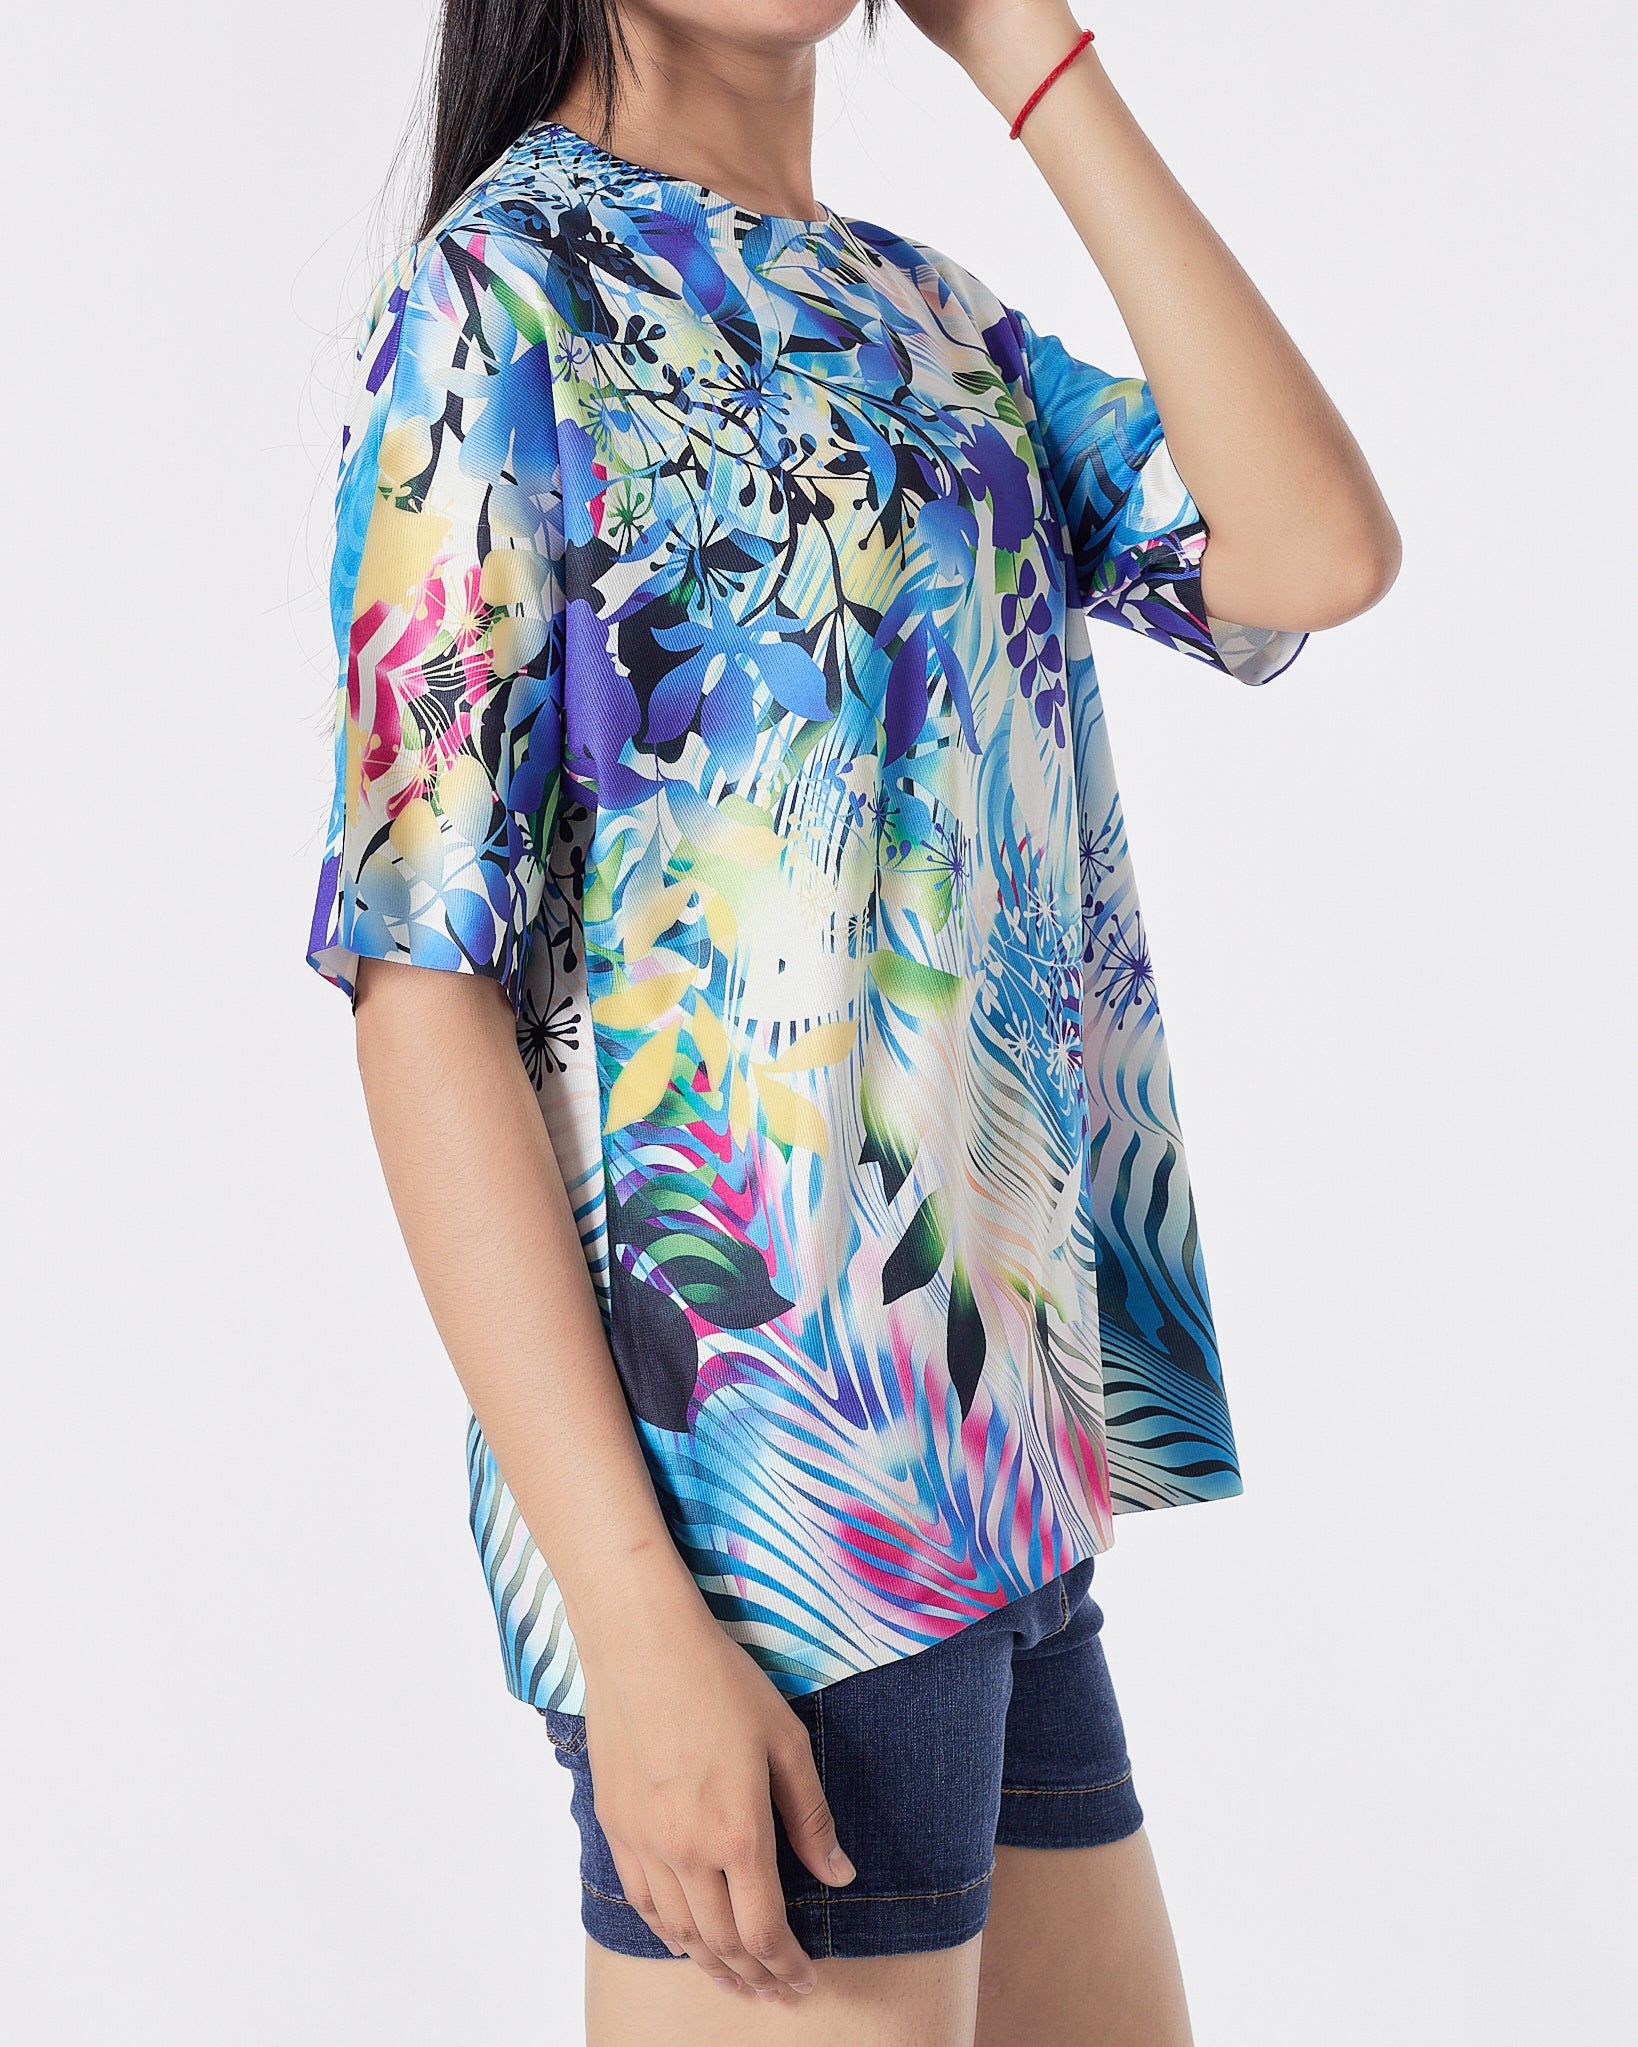 Floral Over Printed Lady T-Shirt 15.90